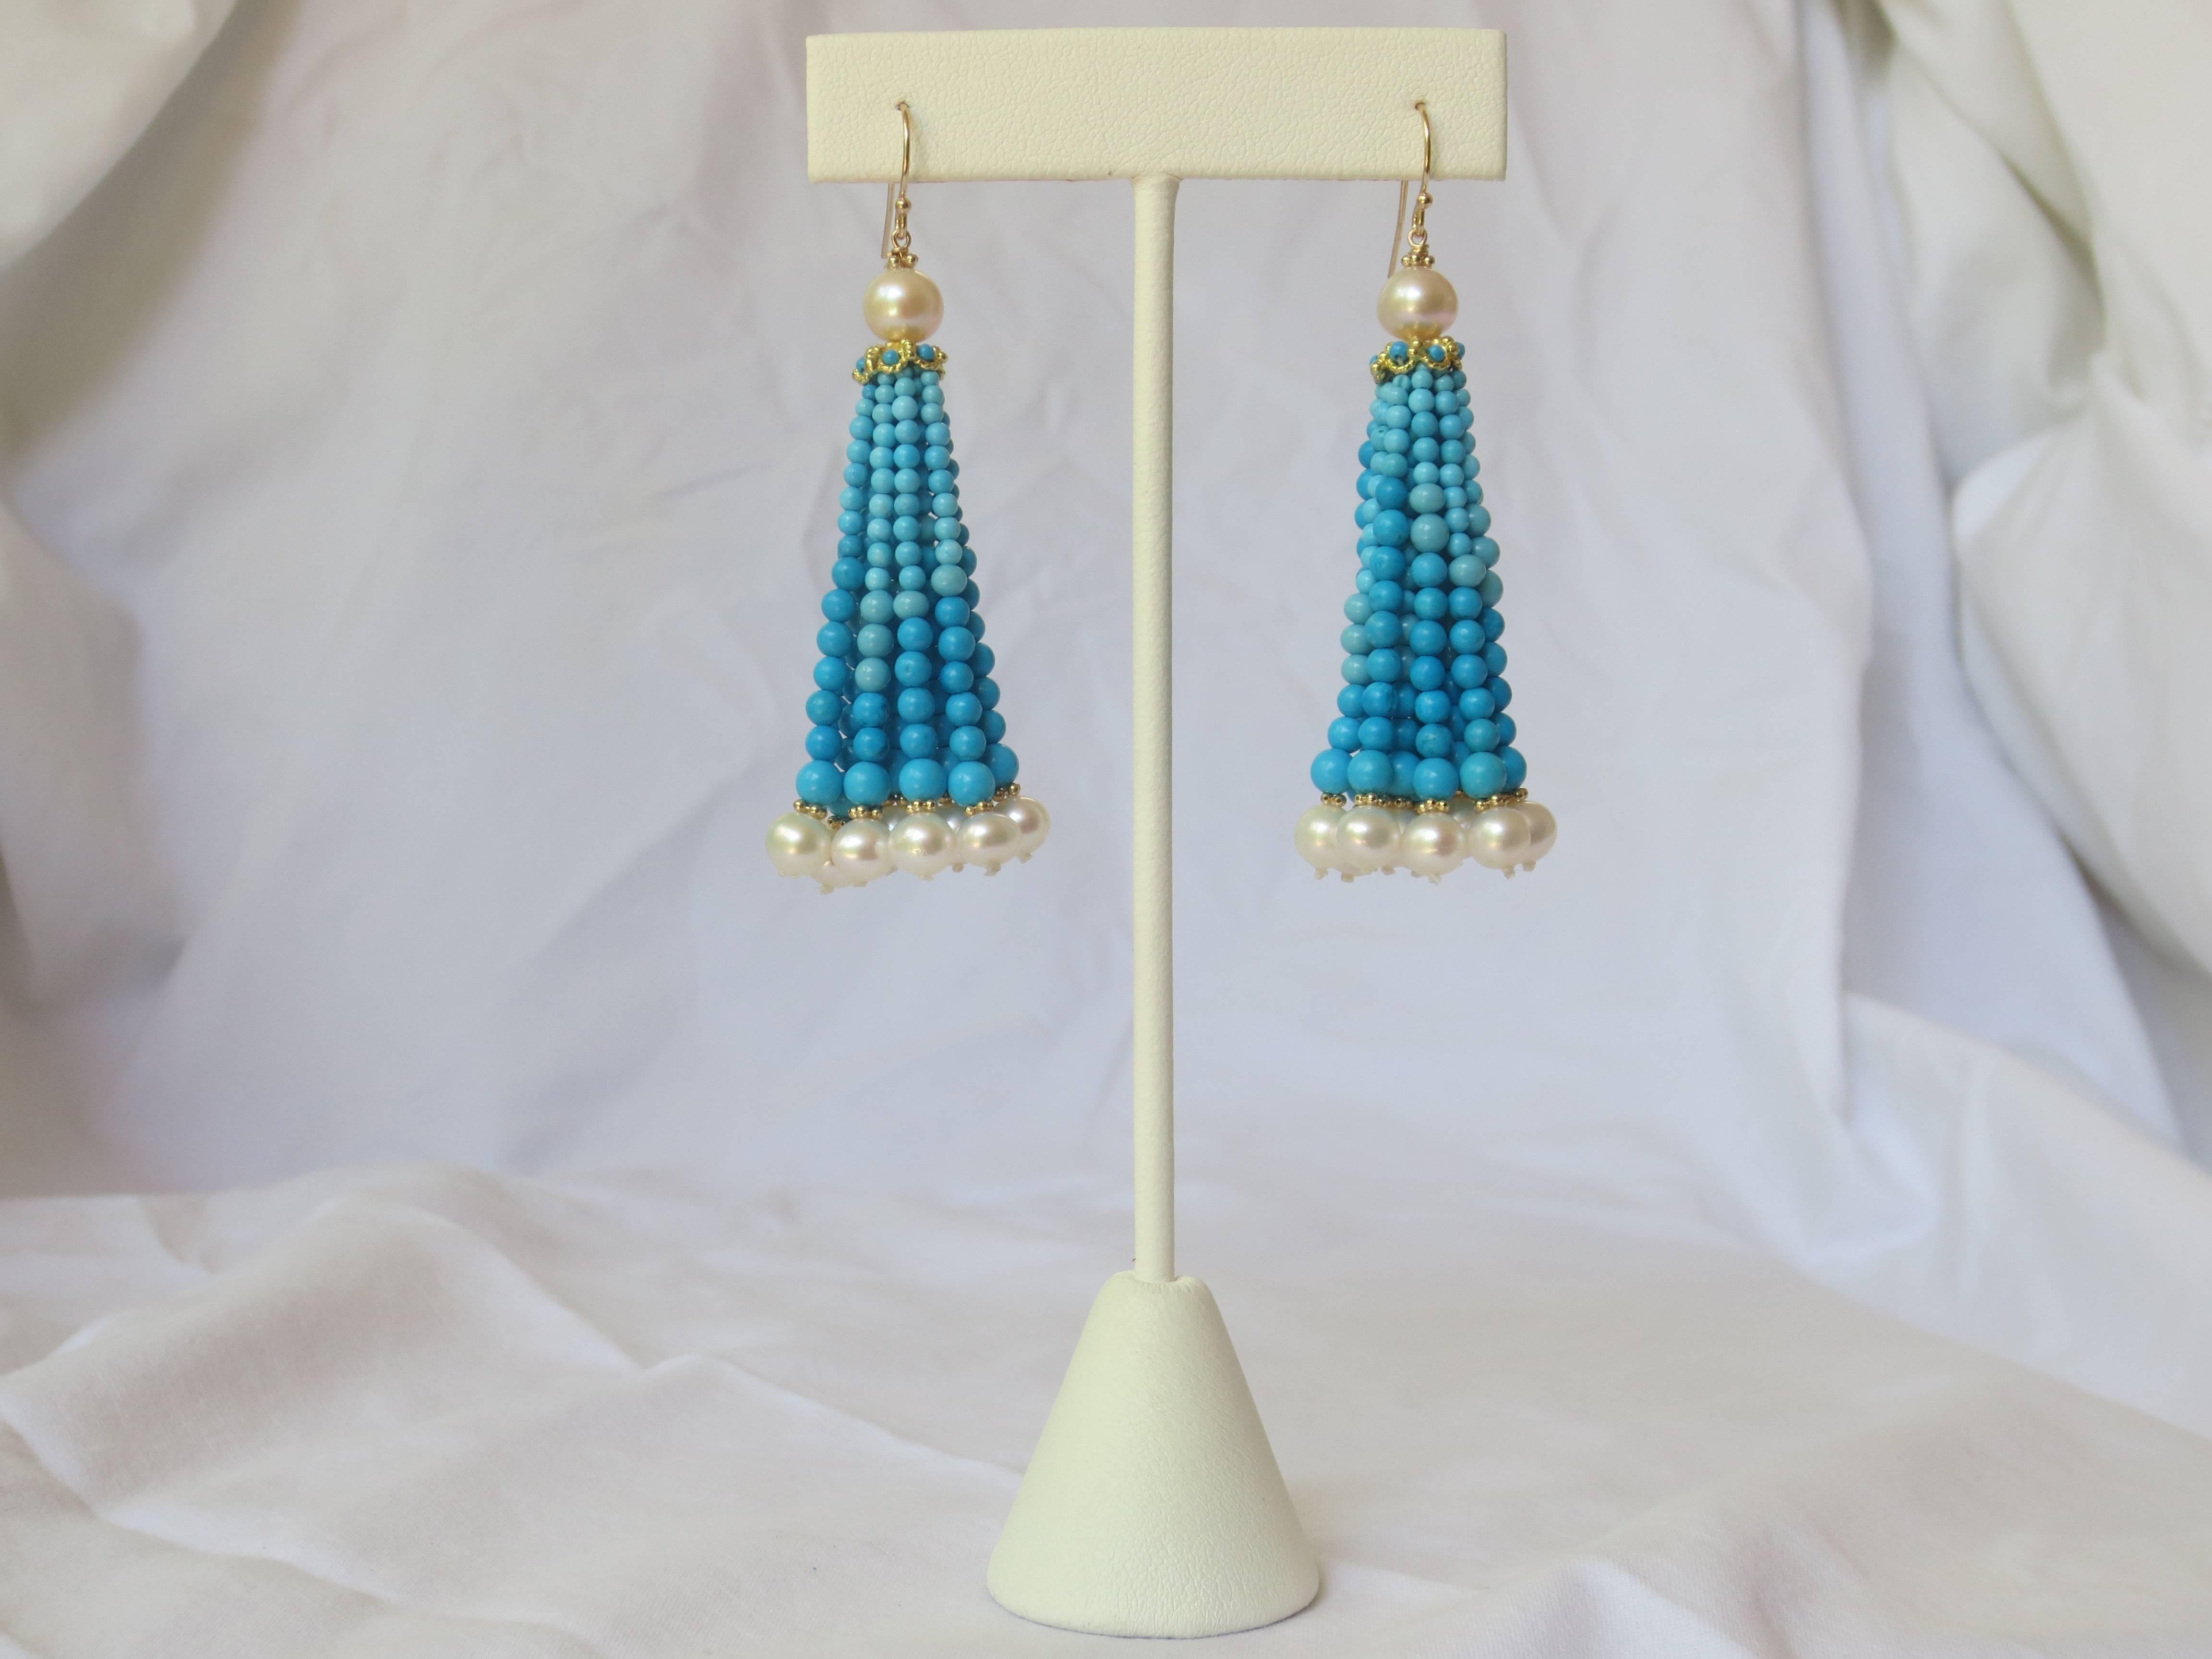 bead and wire earrings